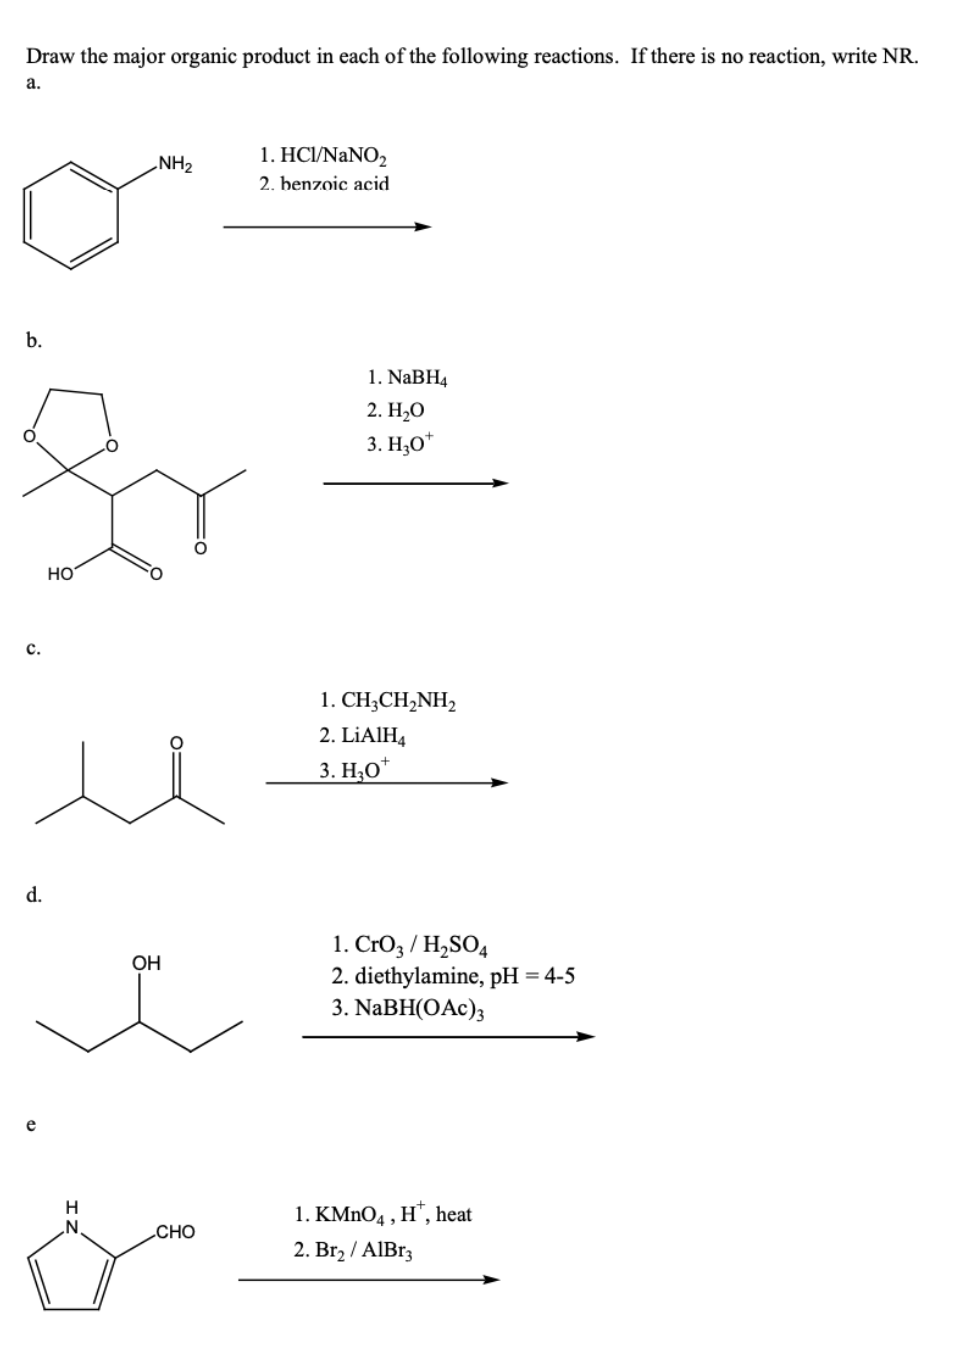 Draw the major organic product in each of the following reactions. If there is no reaction, write NR.
а.
1. HCI/NANO,
NH2
2. benzoic acid
b.
1. NaBH4
2. H-О
3. H,O*
Но
с.
1. CH;CH,NH2
2. LİAIH4
3. Н.О*
d.
1. CrO3 / H,SO4
2. diethylamine, pH = 4-5
3. NaBH(OAc);
OH
e
H
.N.
1. KMNO4 , H", heat
CHO
2. Br2 / AIB33
